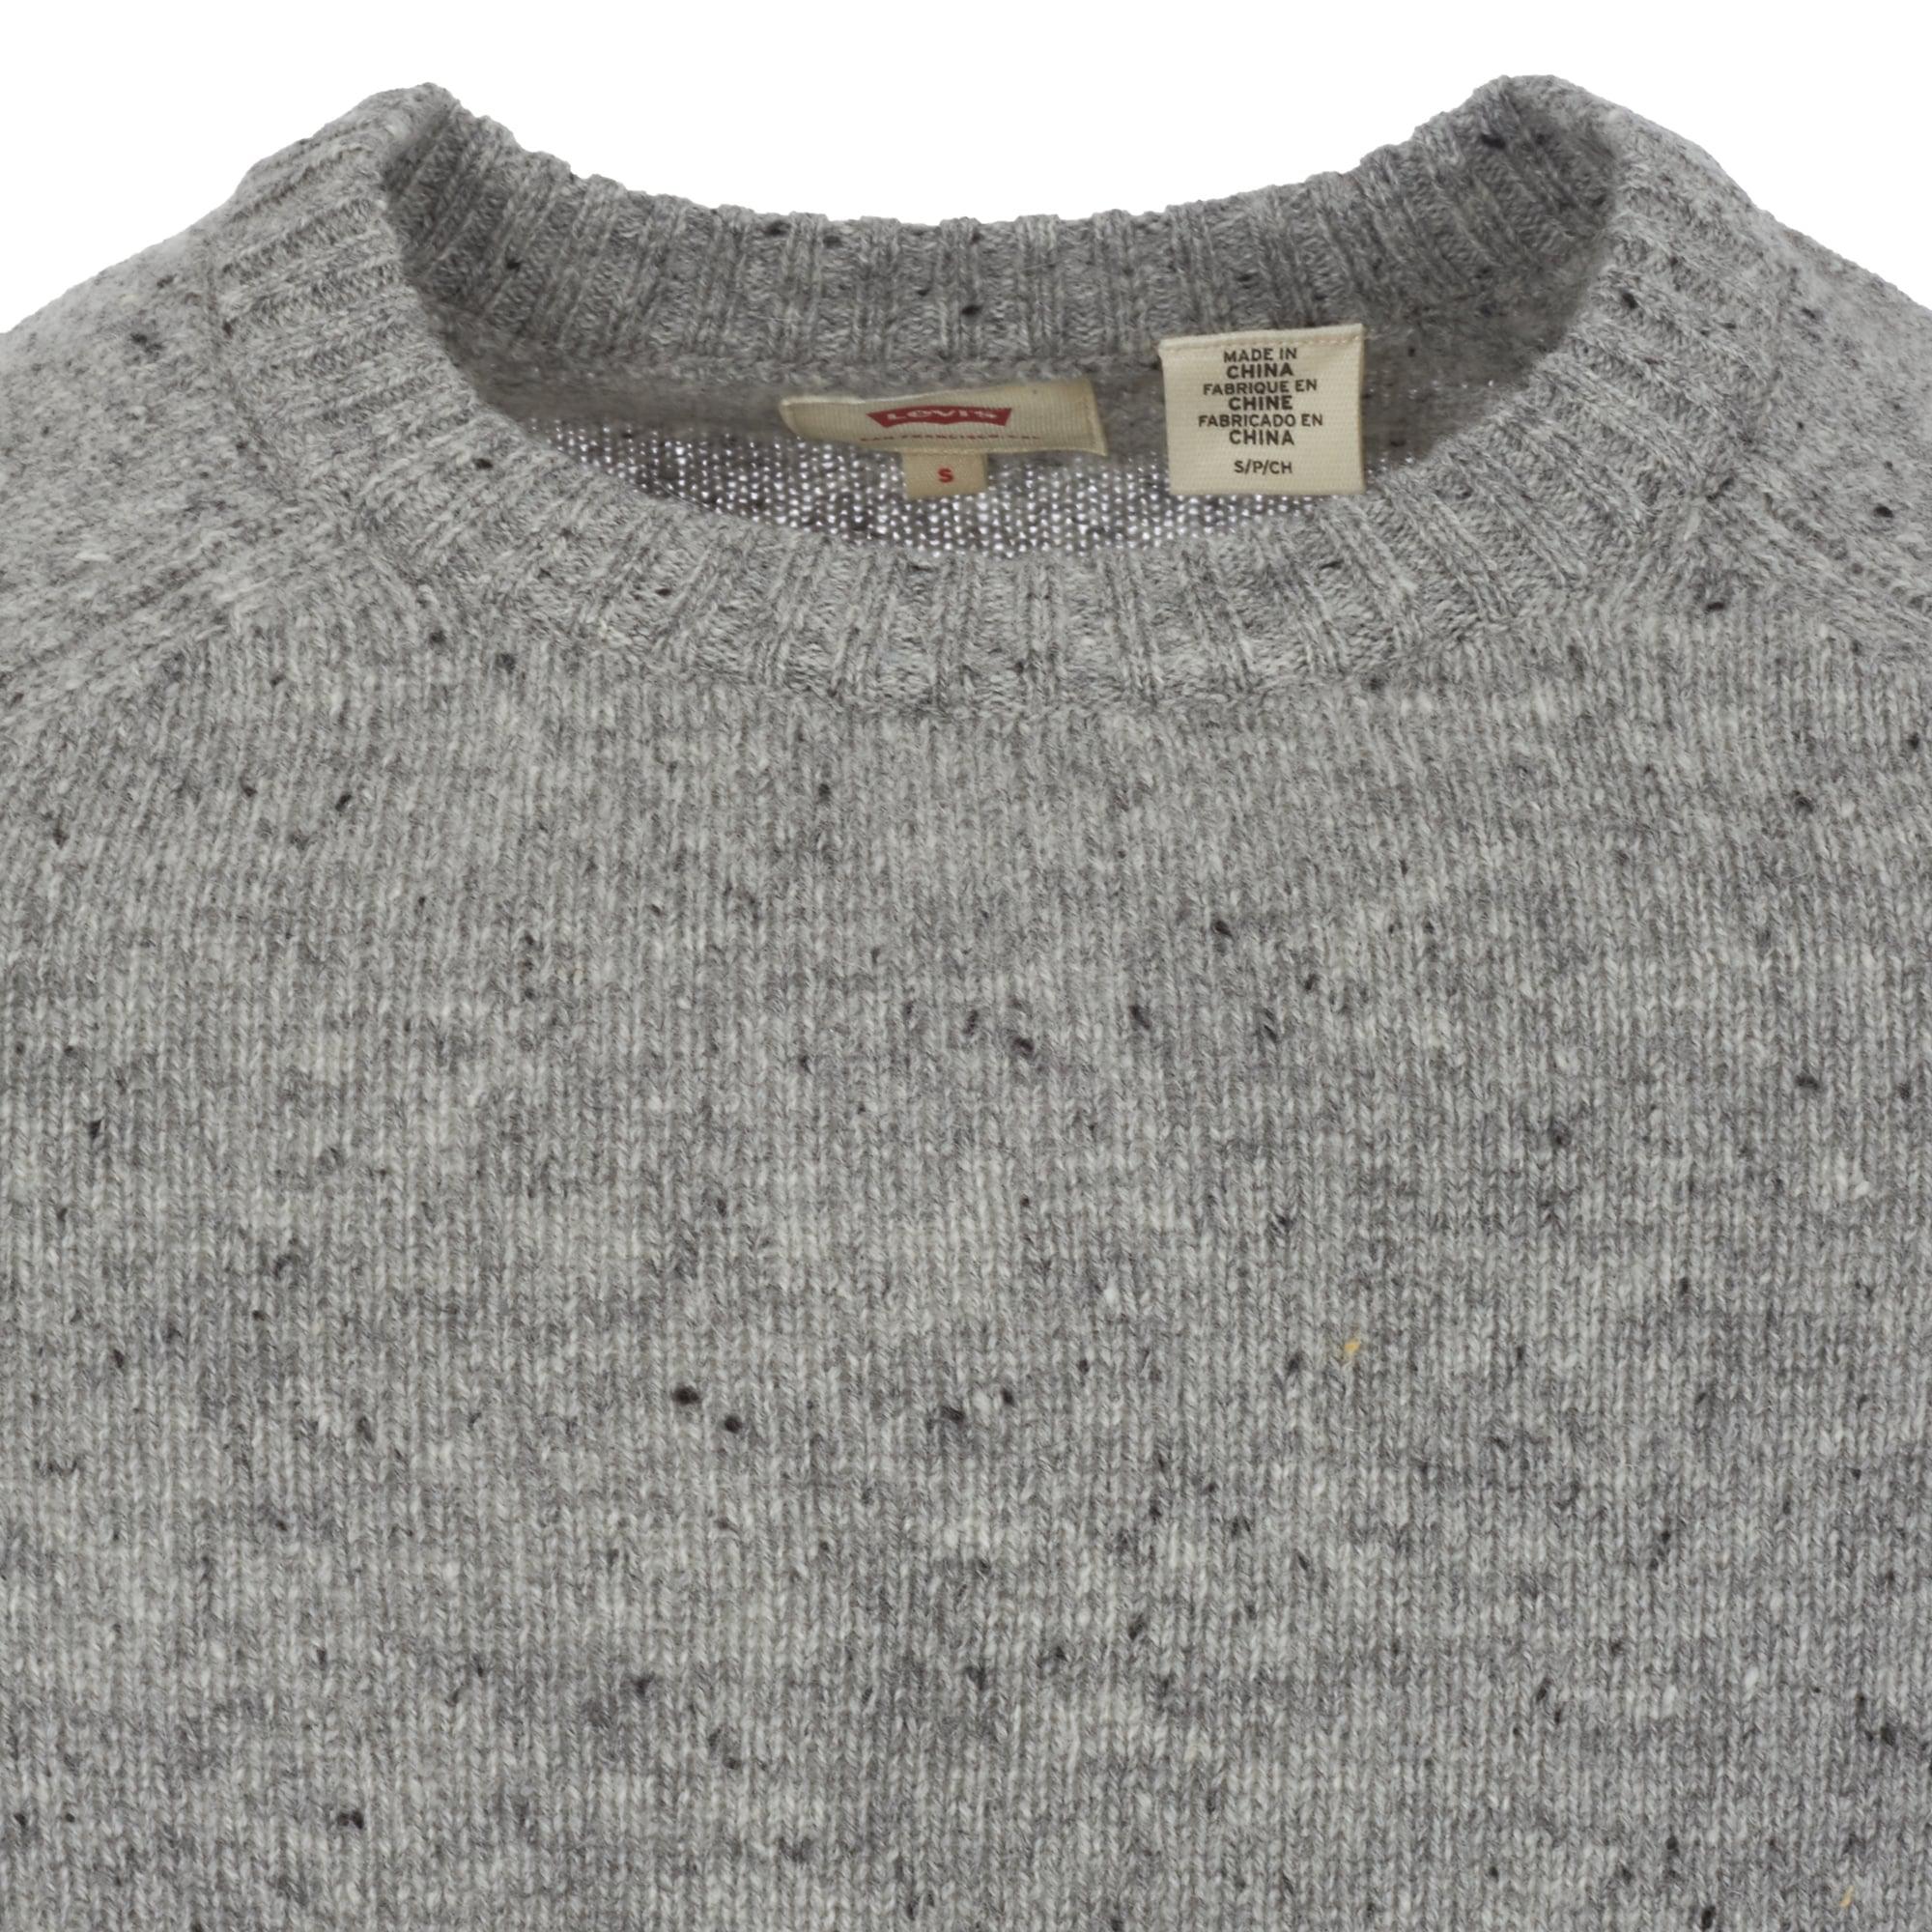 Levi's Wool Grey Speckled Hayes Crew Neck Jumper in Grey for Men - Lyst